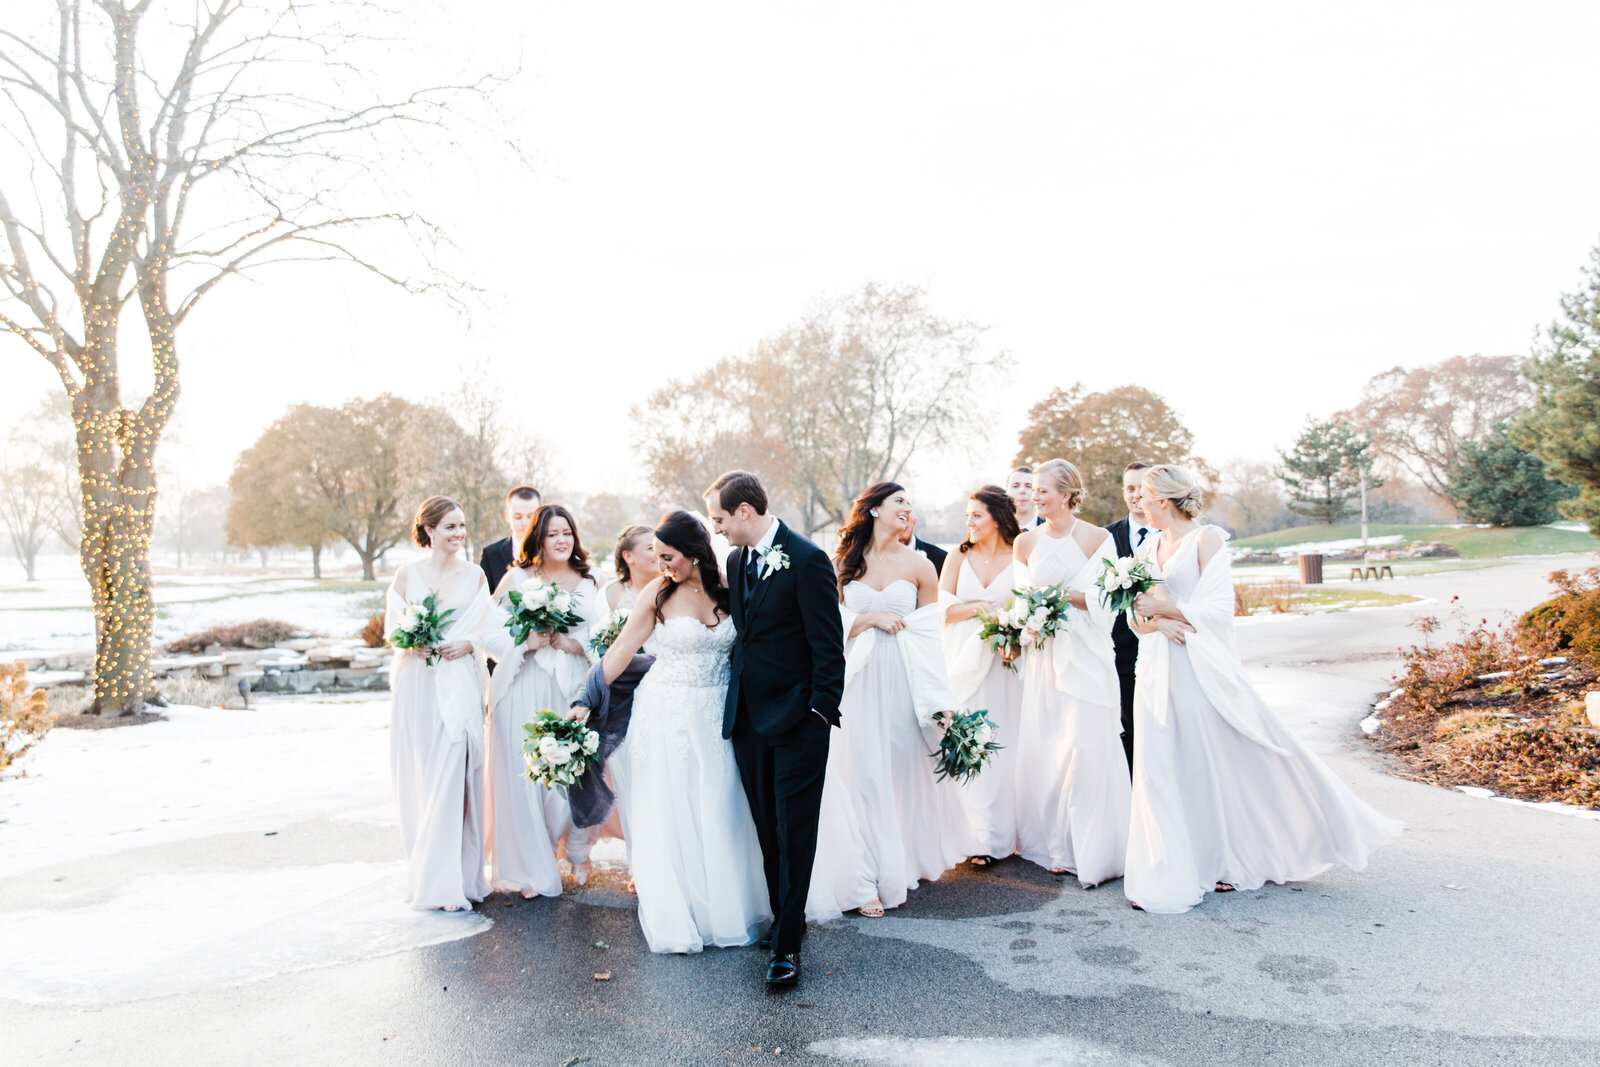 wedding party walking in the park chiago wedding photographer chevy chase golf club wedding in winter